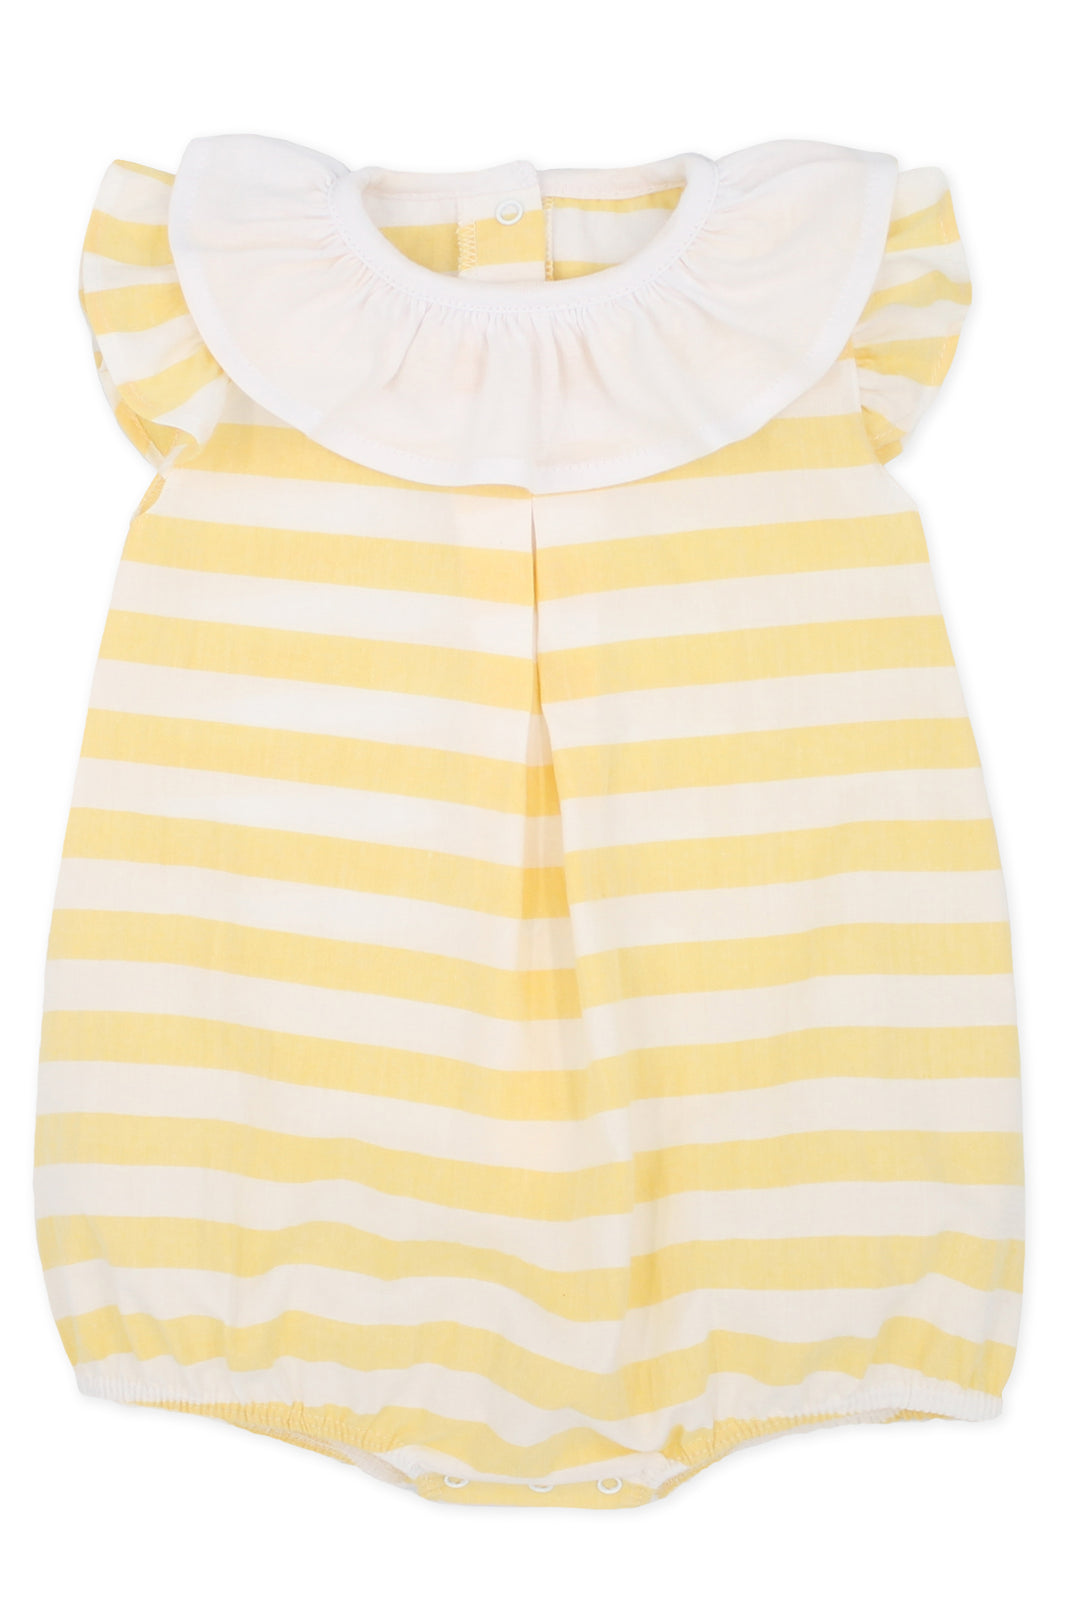 Rapife "Coral" Pale Yellow Stripe Romper | Millie and John